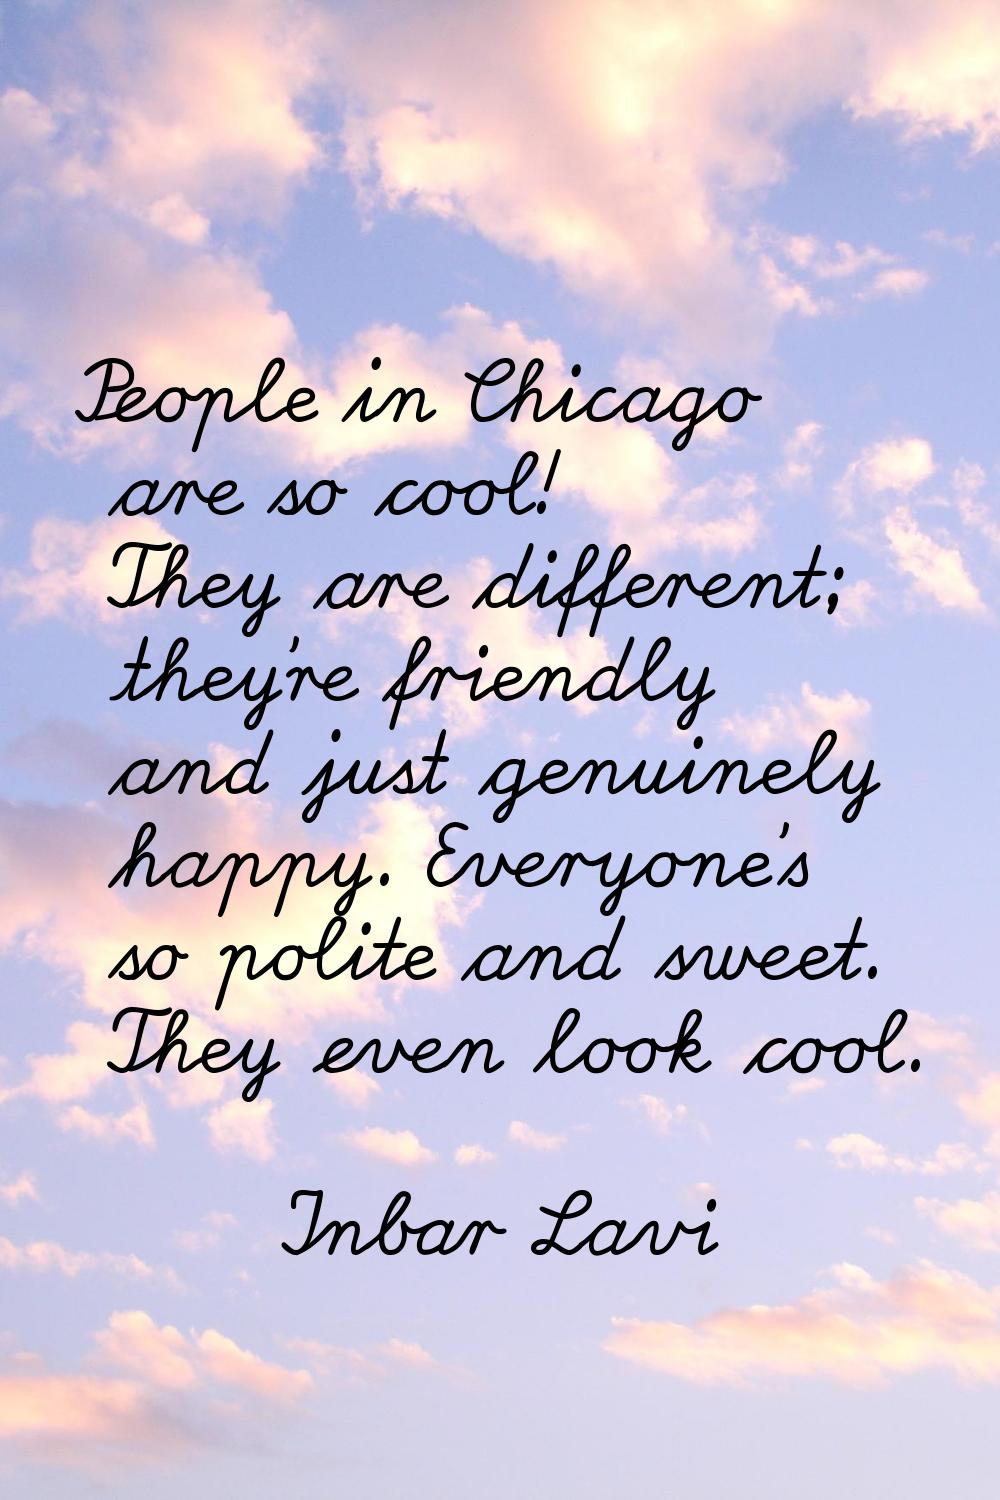 People in Chicago are so cool! They are different; they're friendly and just genuinely happy. Every